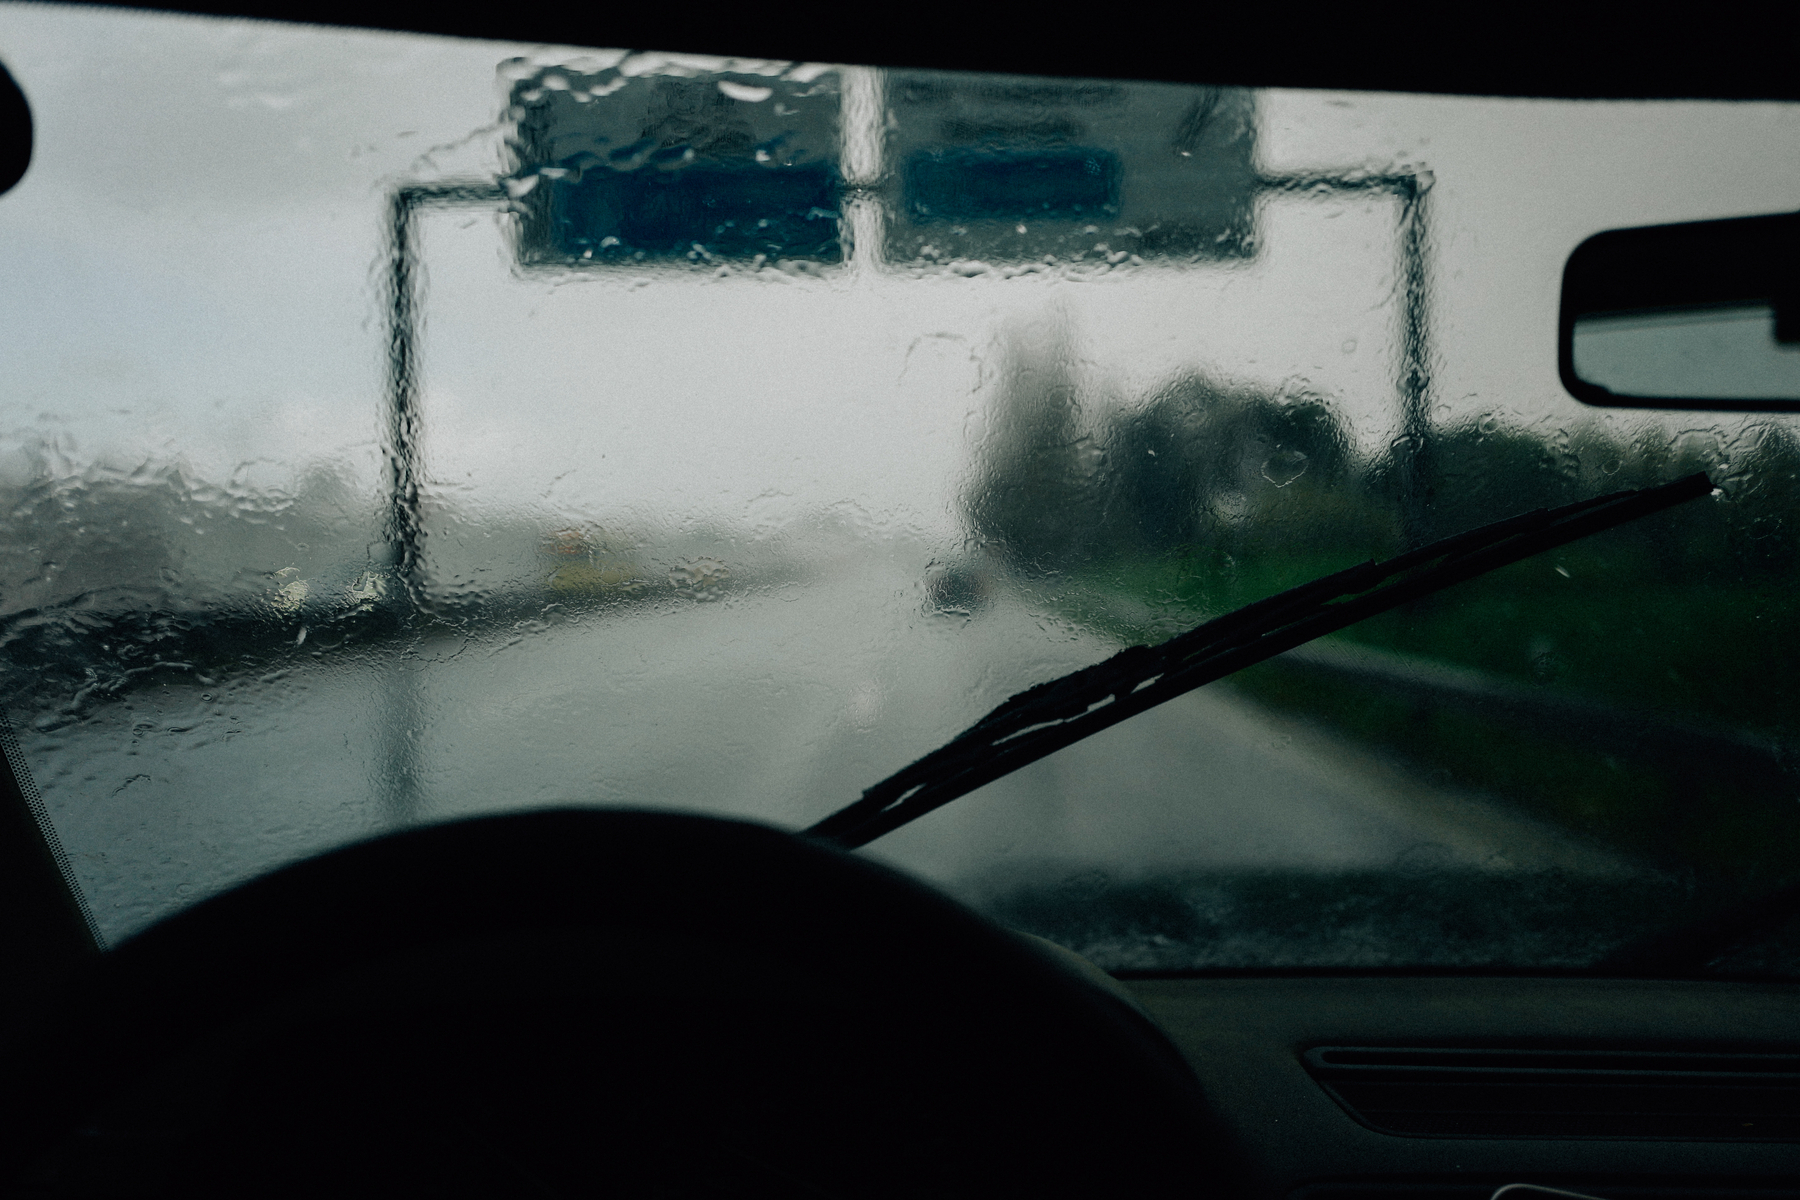 View from inside a car during rain with water droplets on the windshield and windshield wipers visible, looking out onto a blurred road and traffic signs.